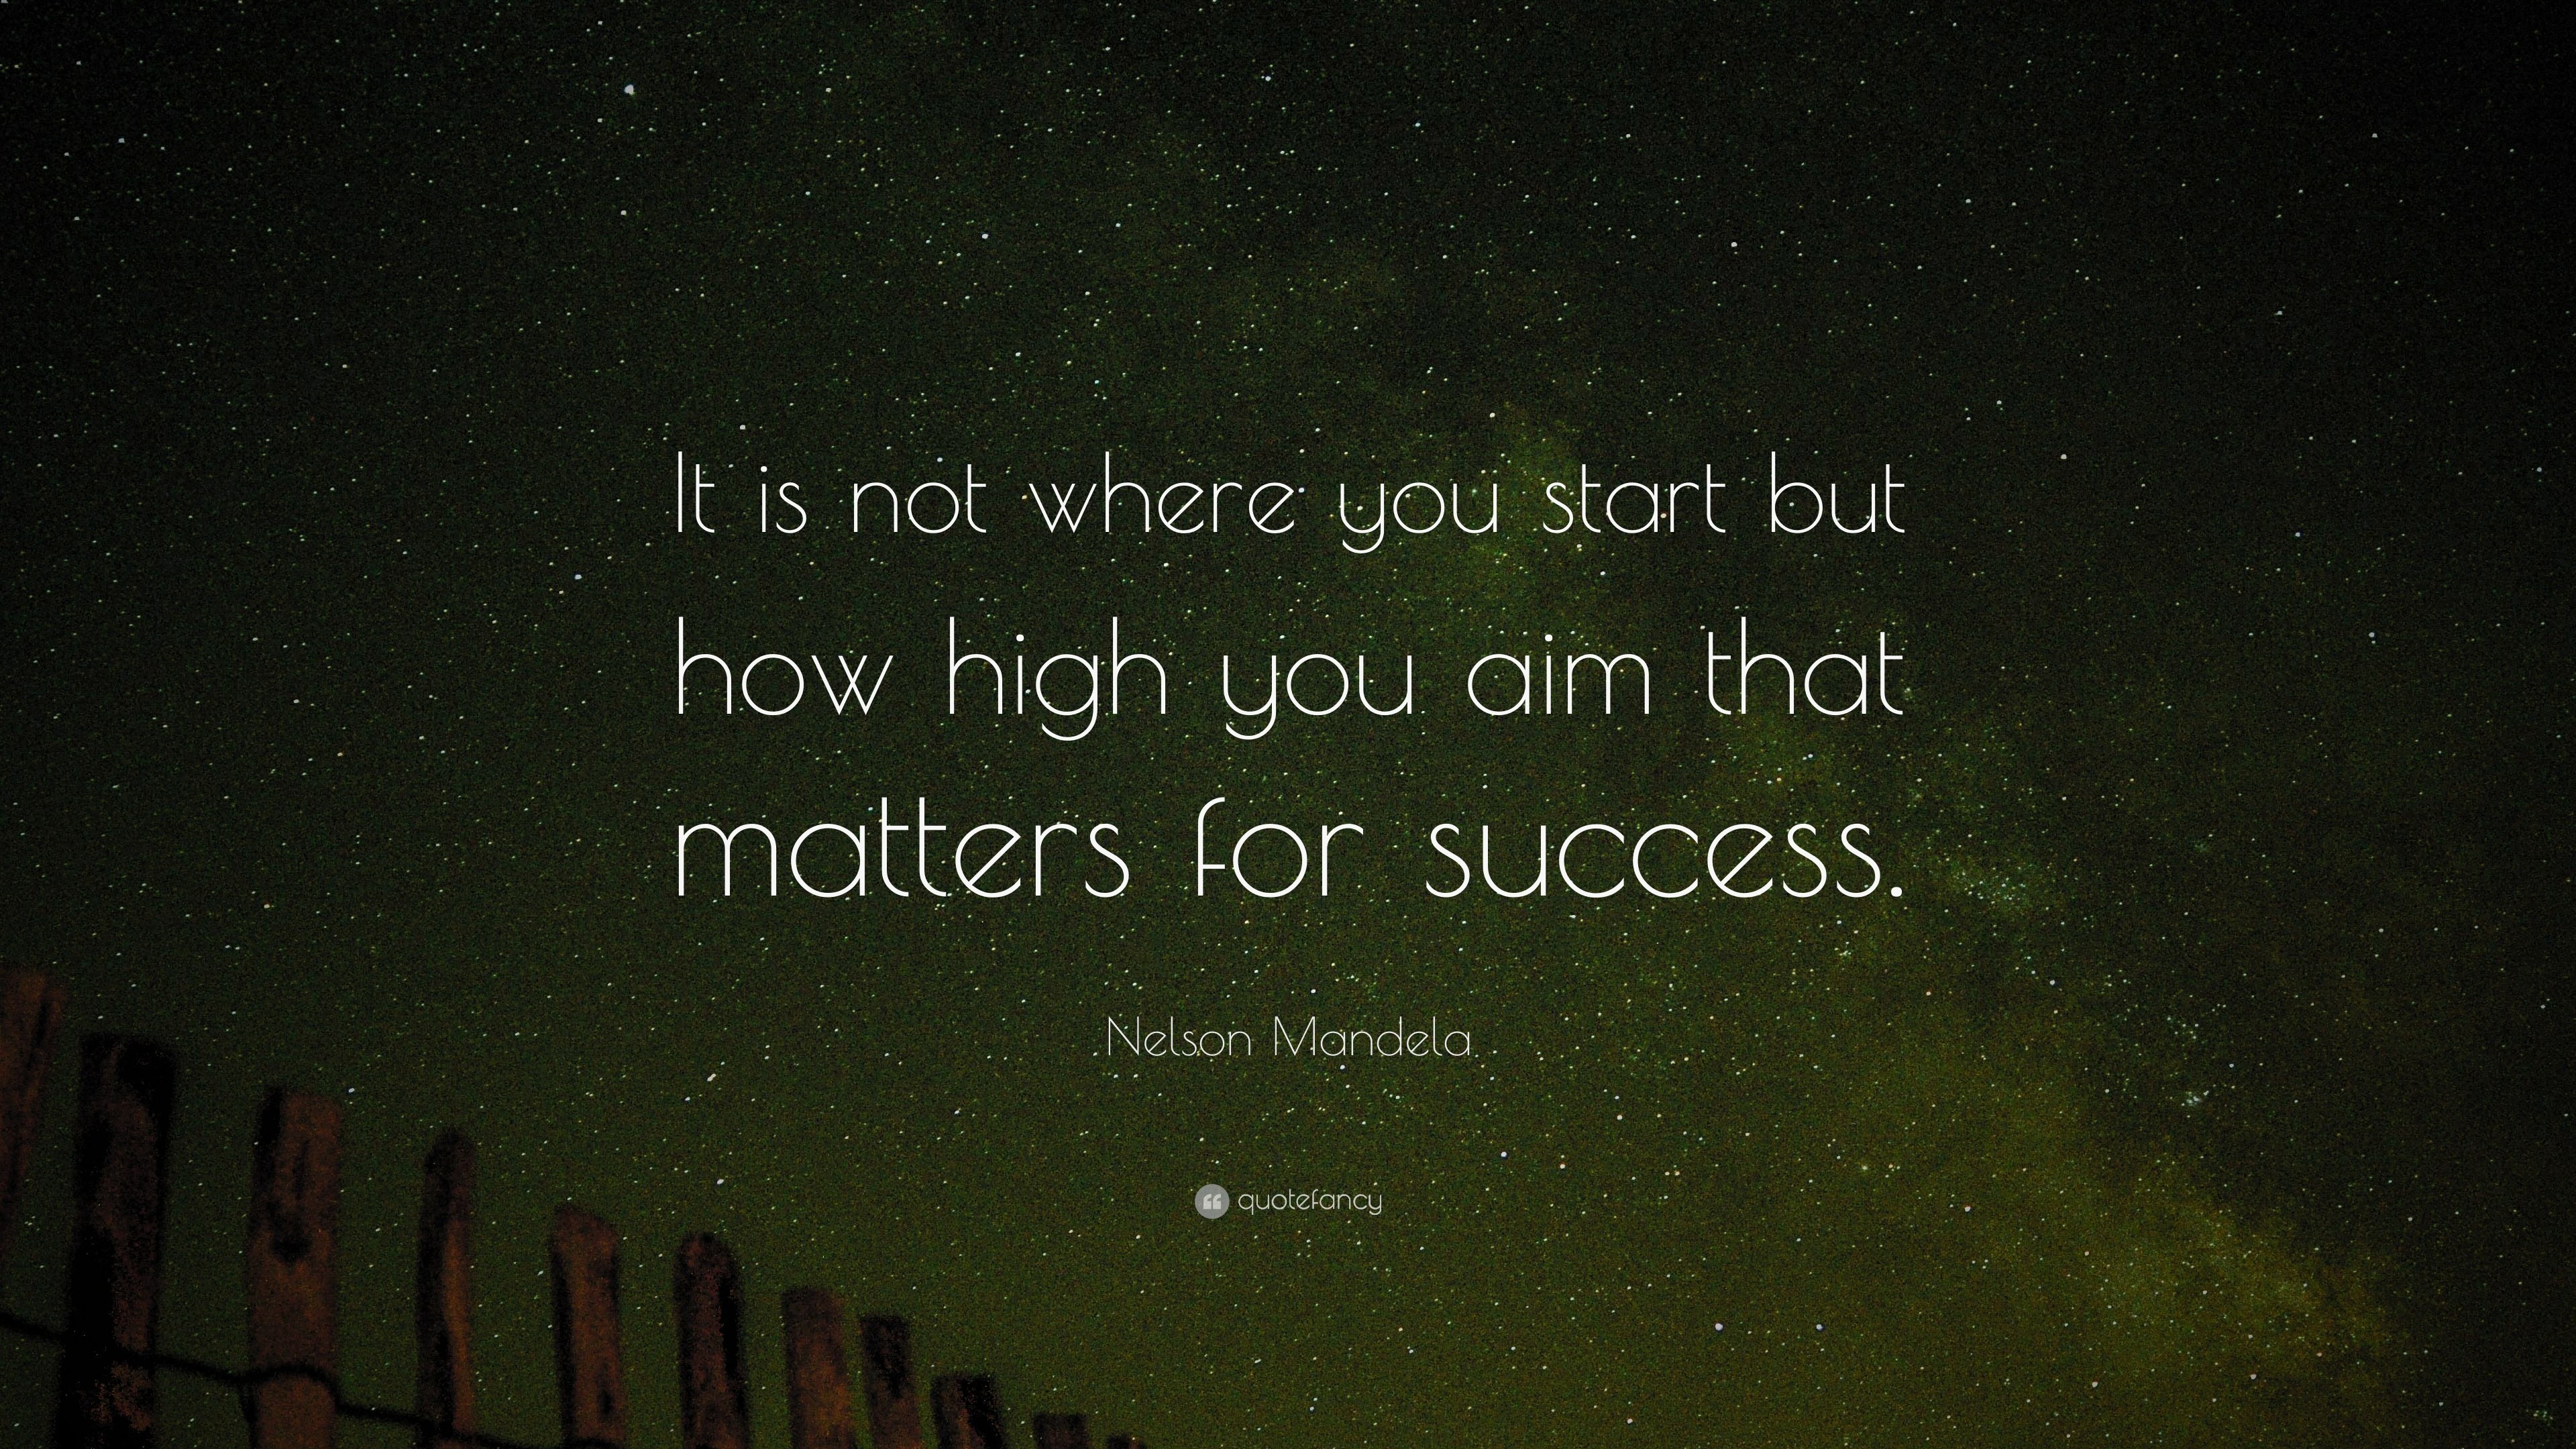 3840x2160 Success Quotes: “It is not where you start but how high you aim that